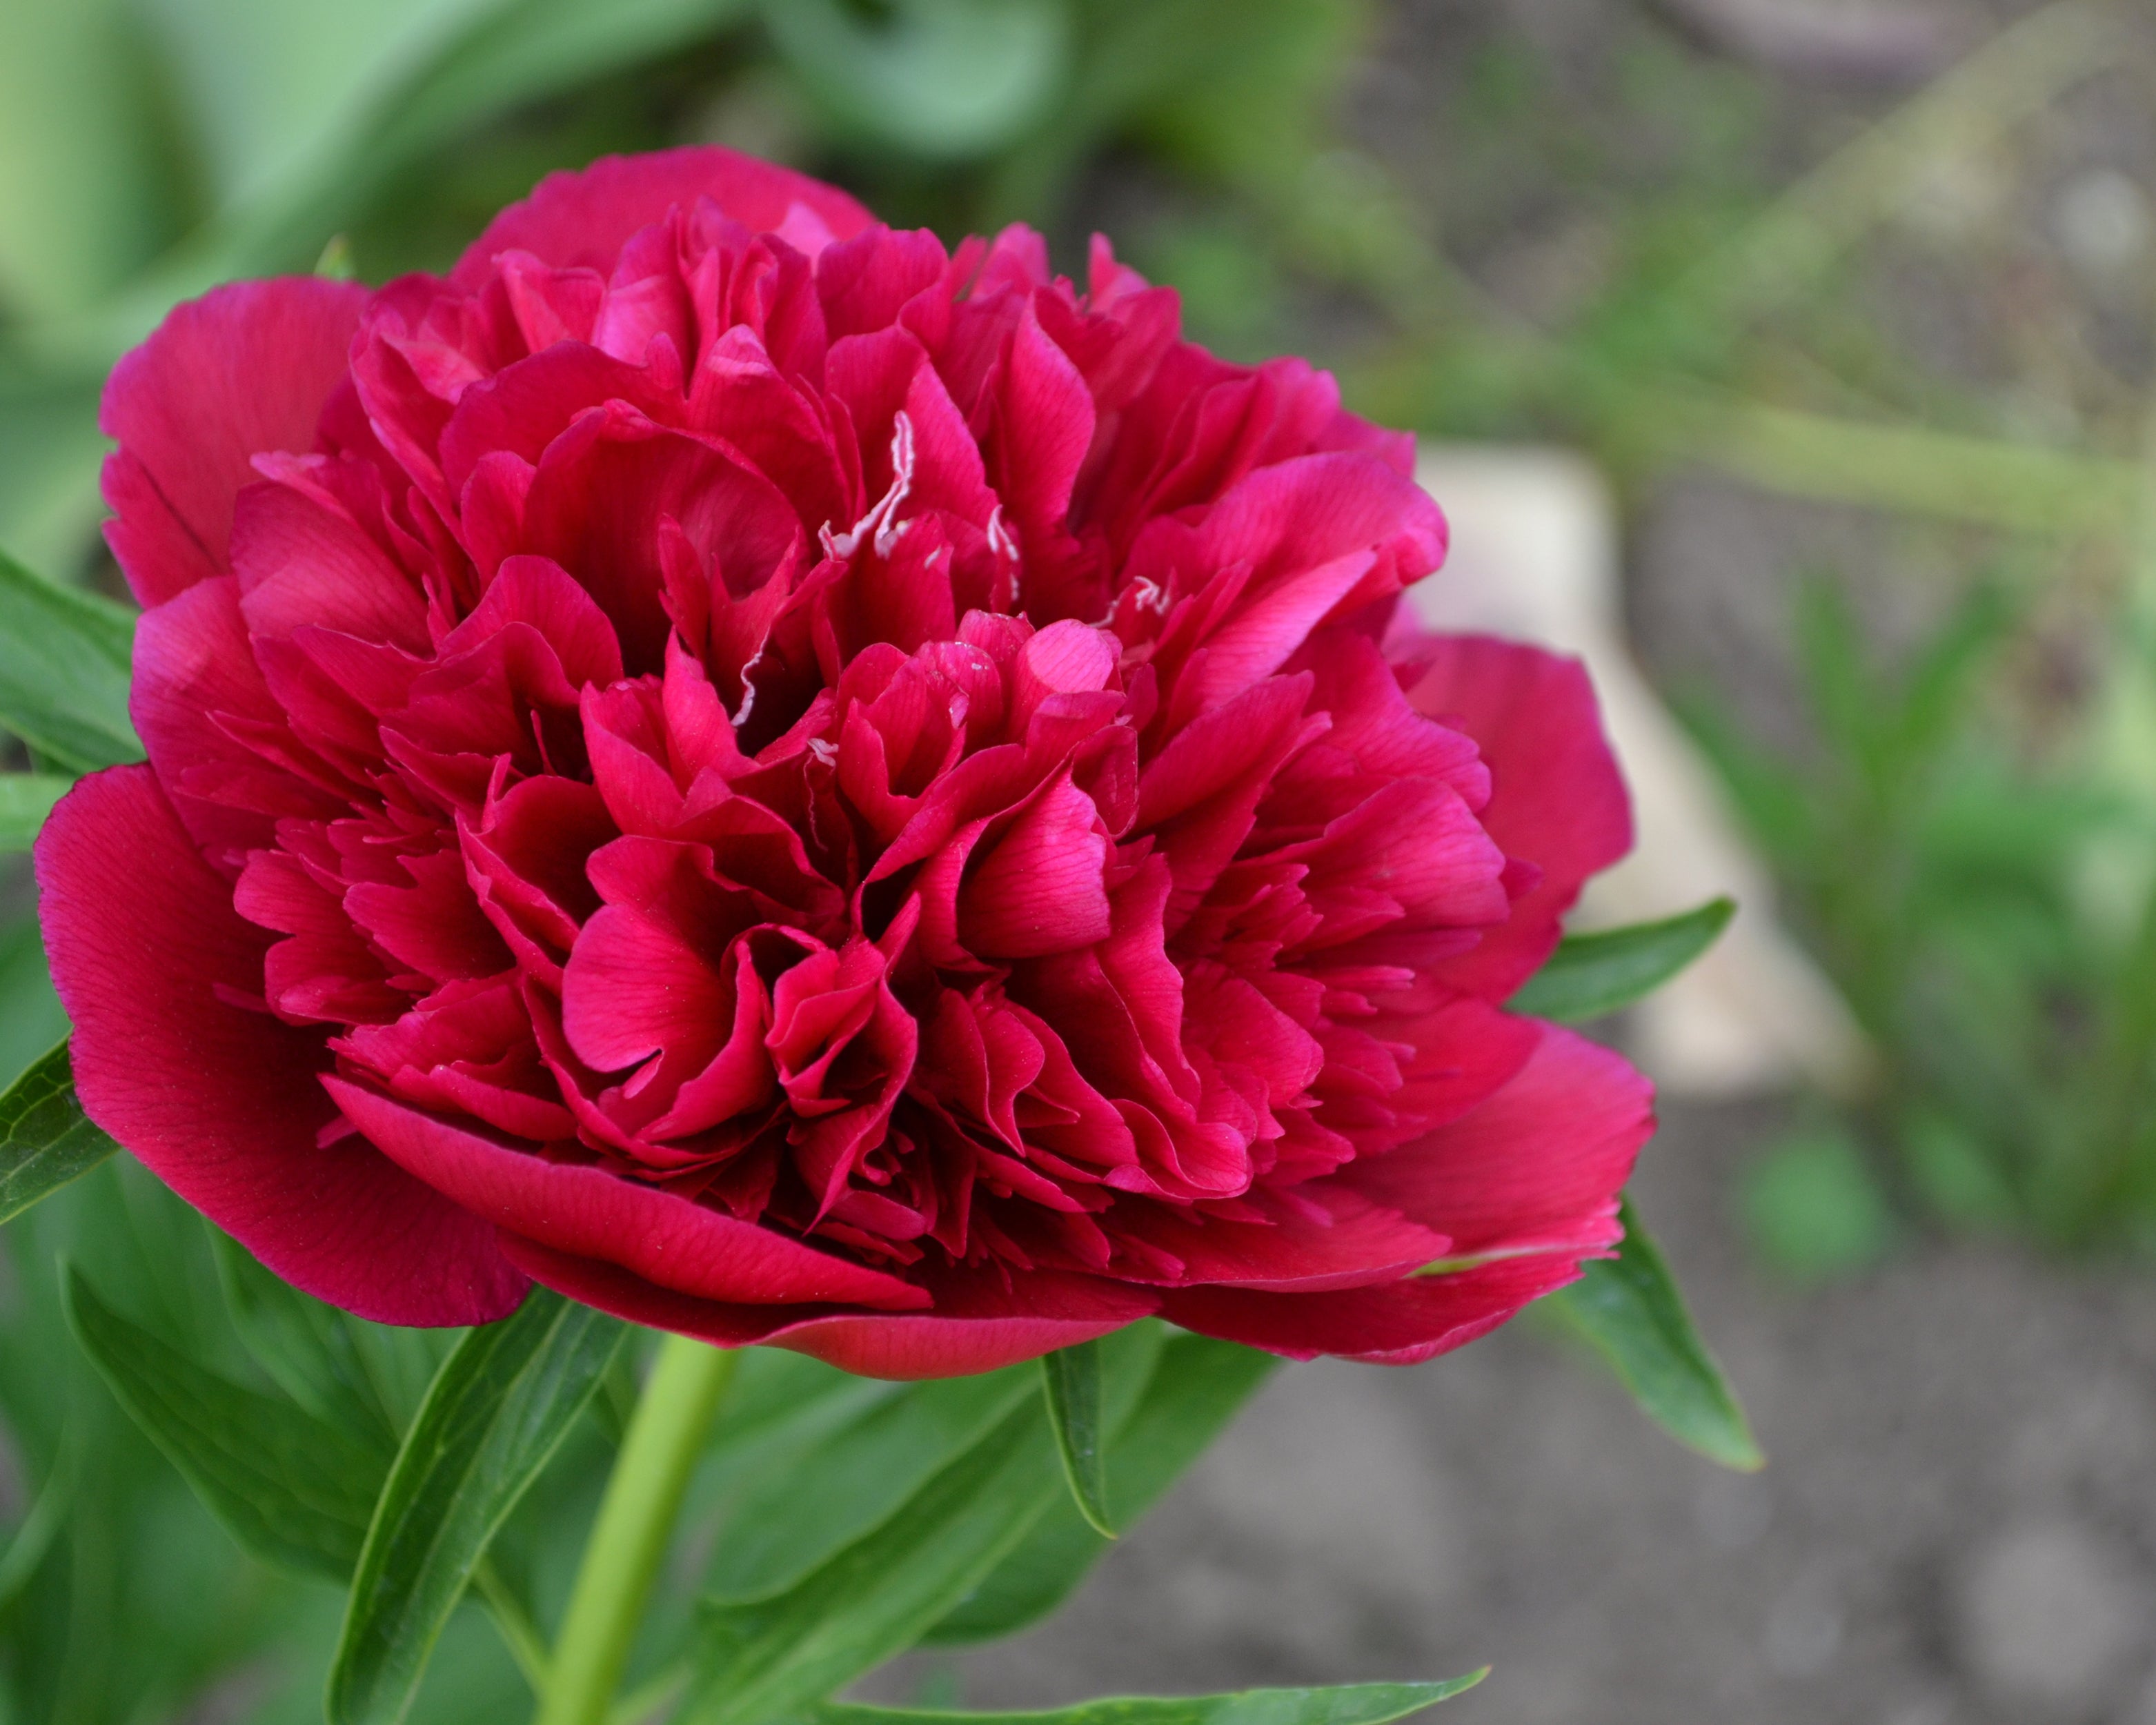 Paeonia 'Red Sarah Bernhardt' bare roots — Buy red peonies online at ...